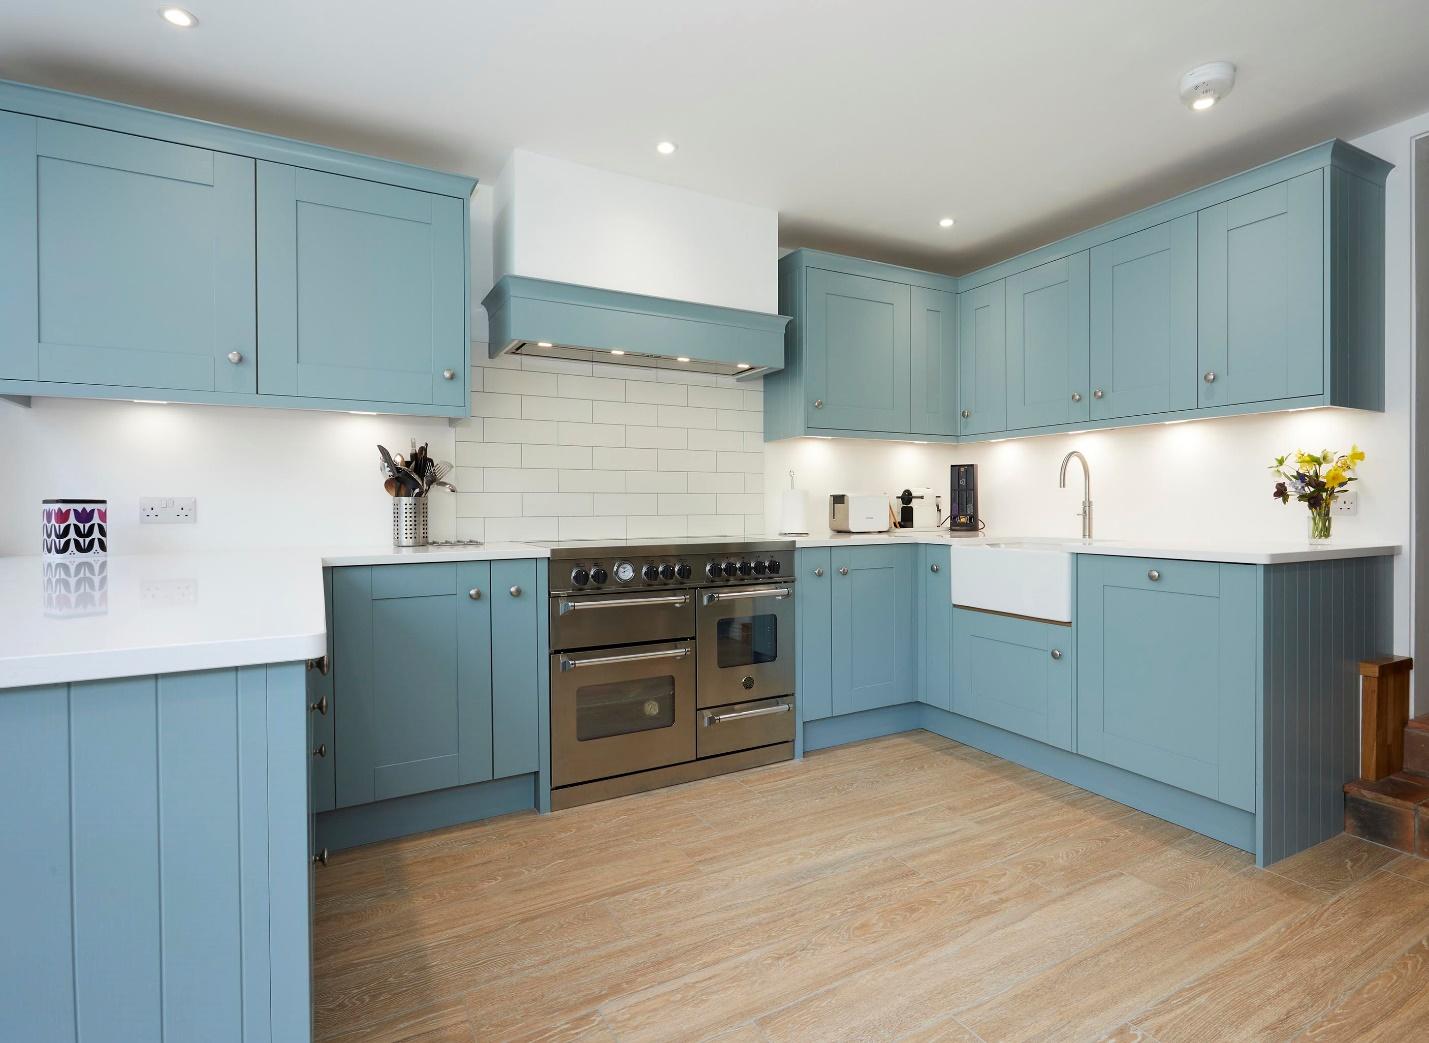 A kitchen with blue cabinets and white counter tops

Description automatically generated